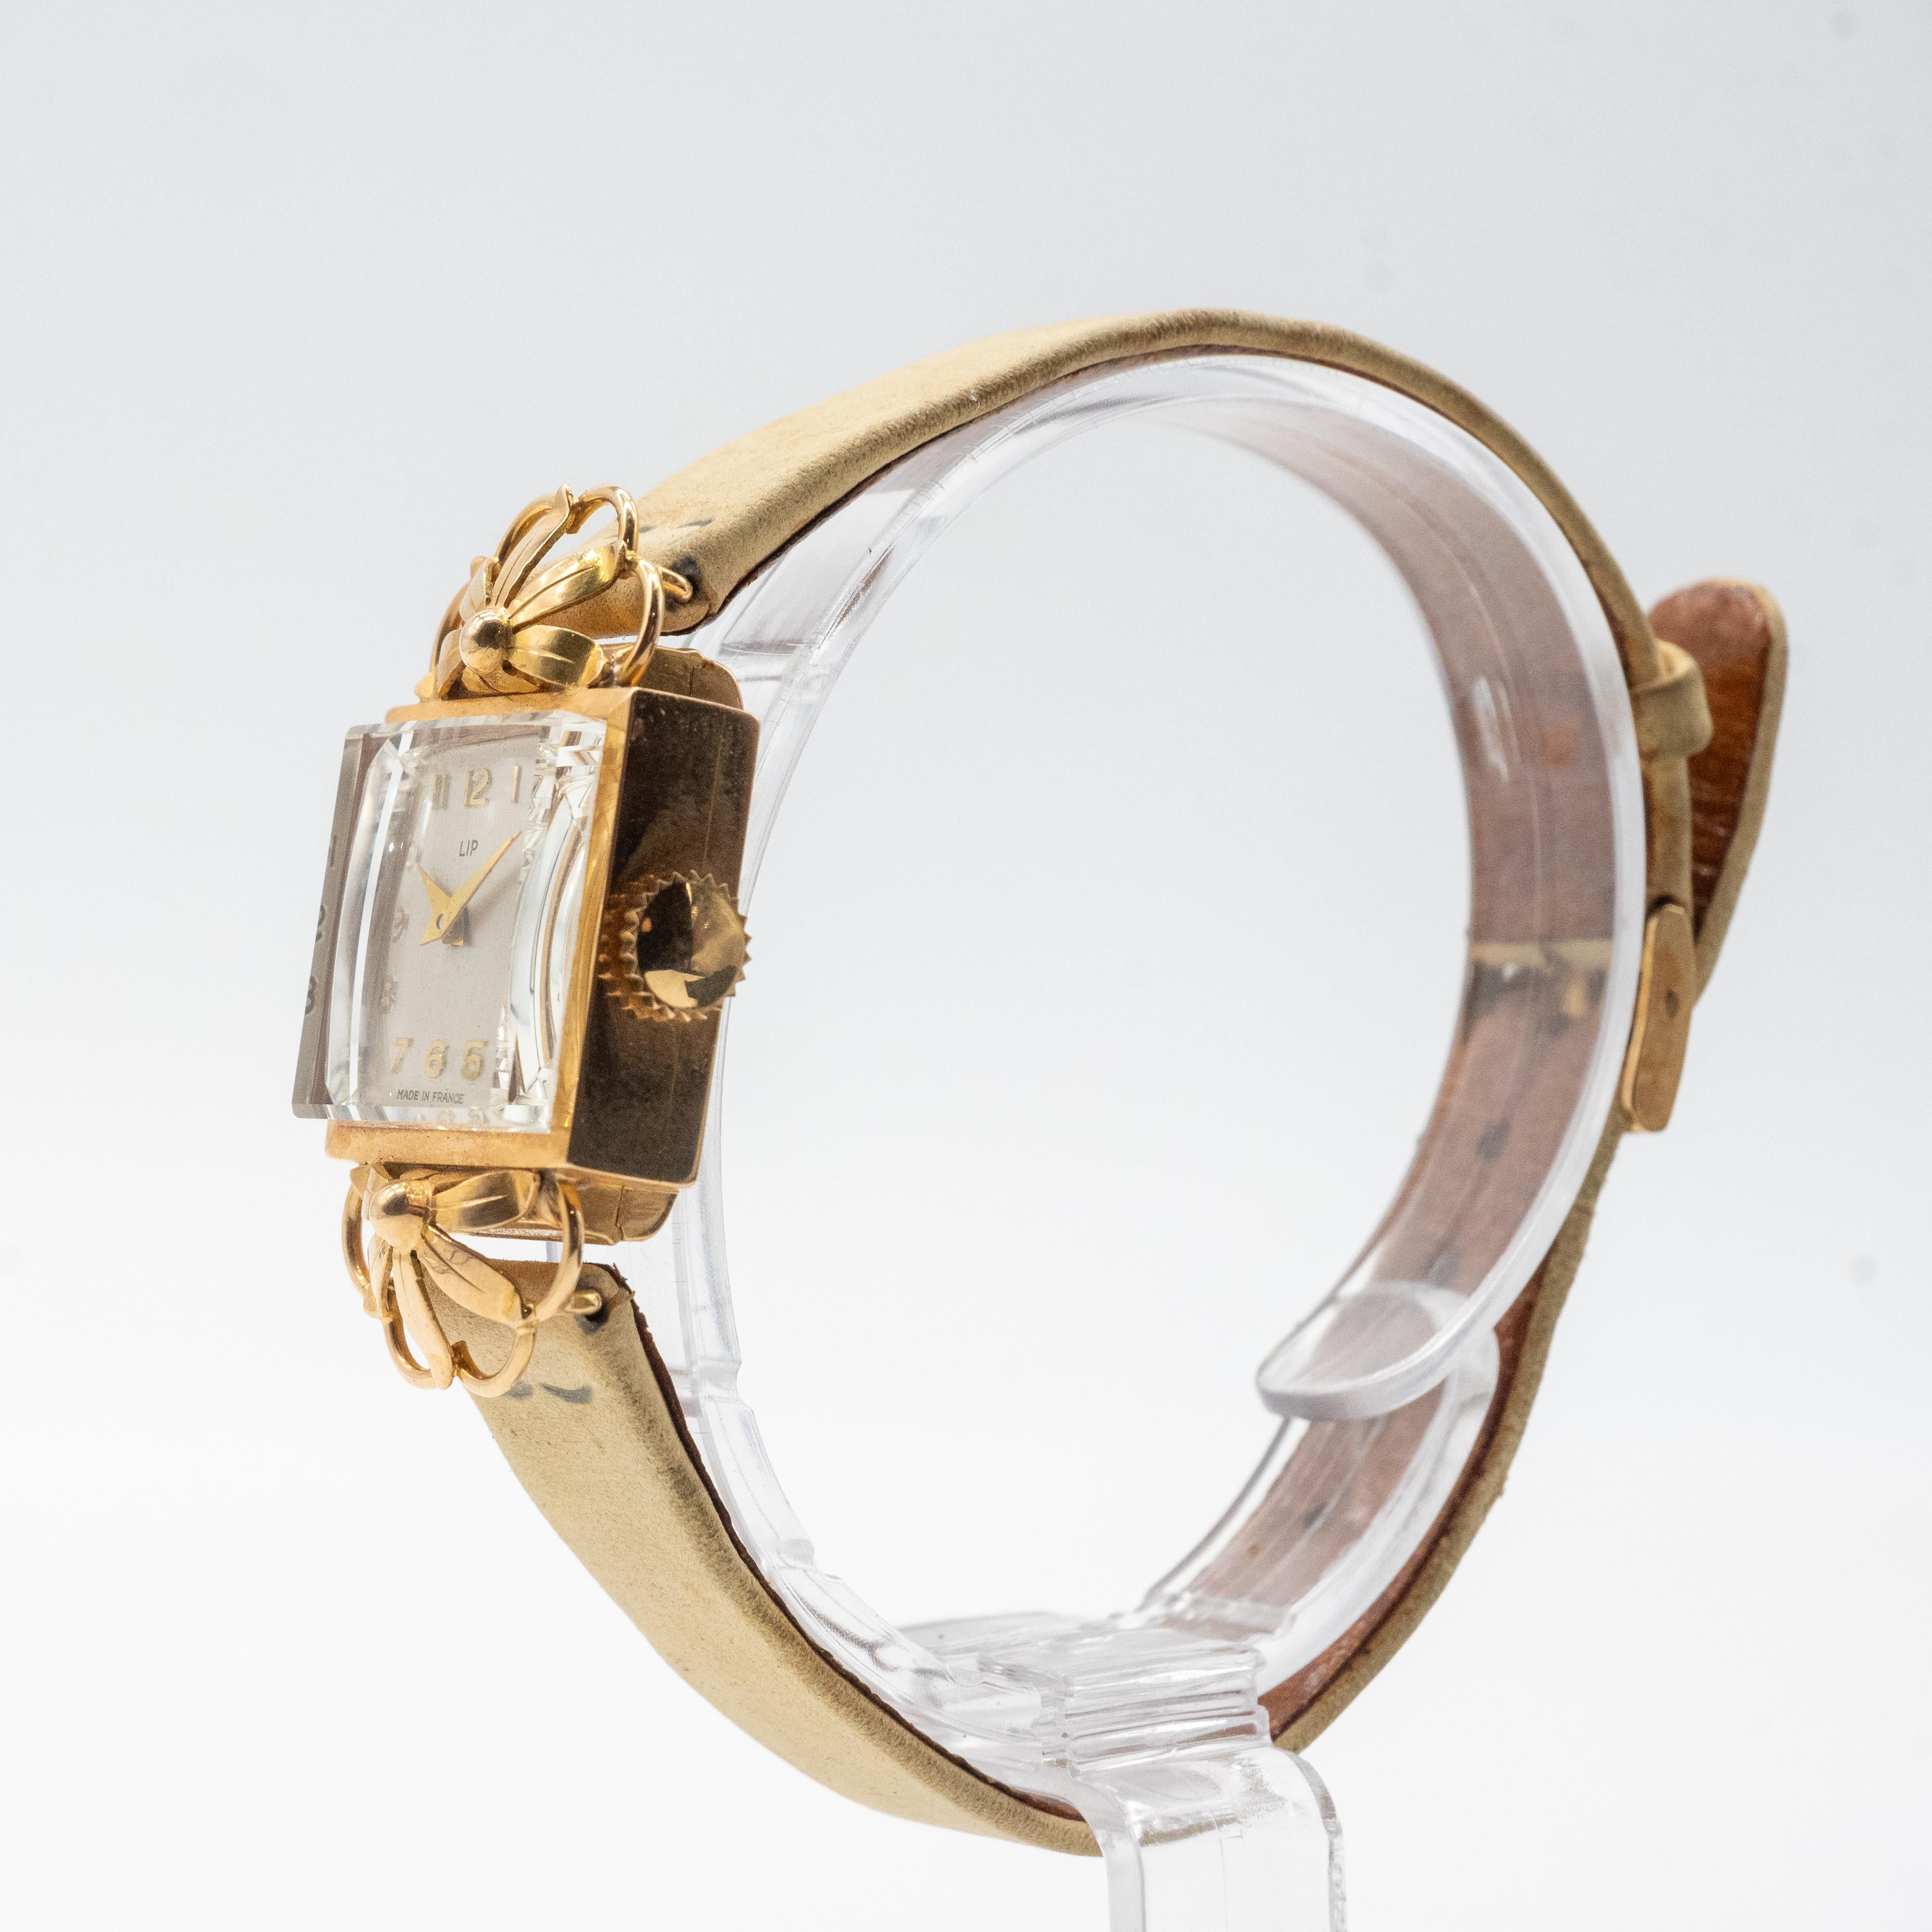 Lip Watch 18-Carats Gold For Sale 3